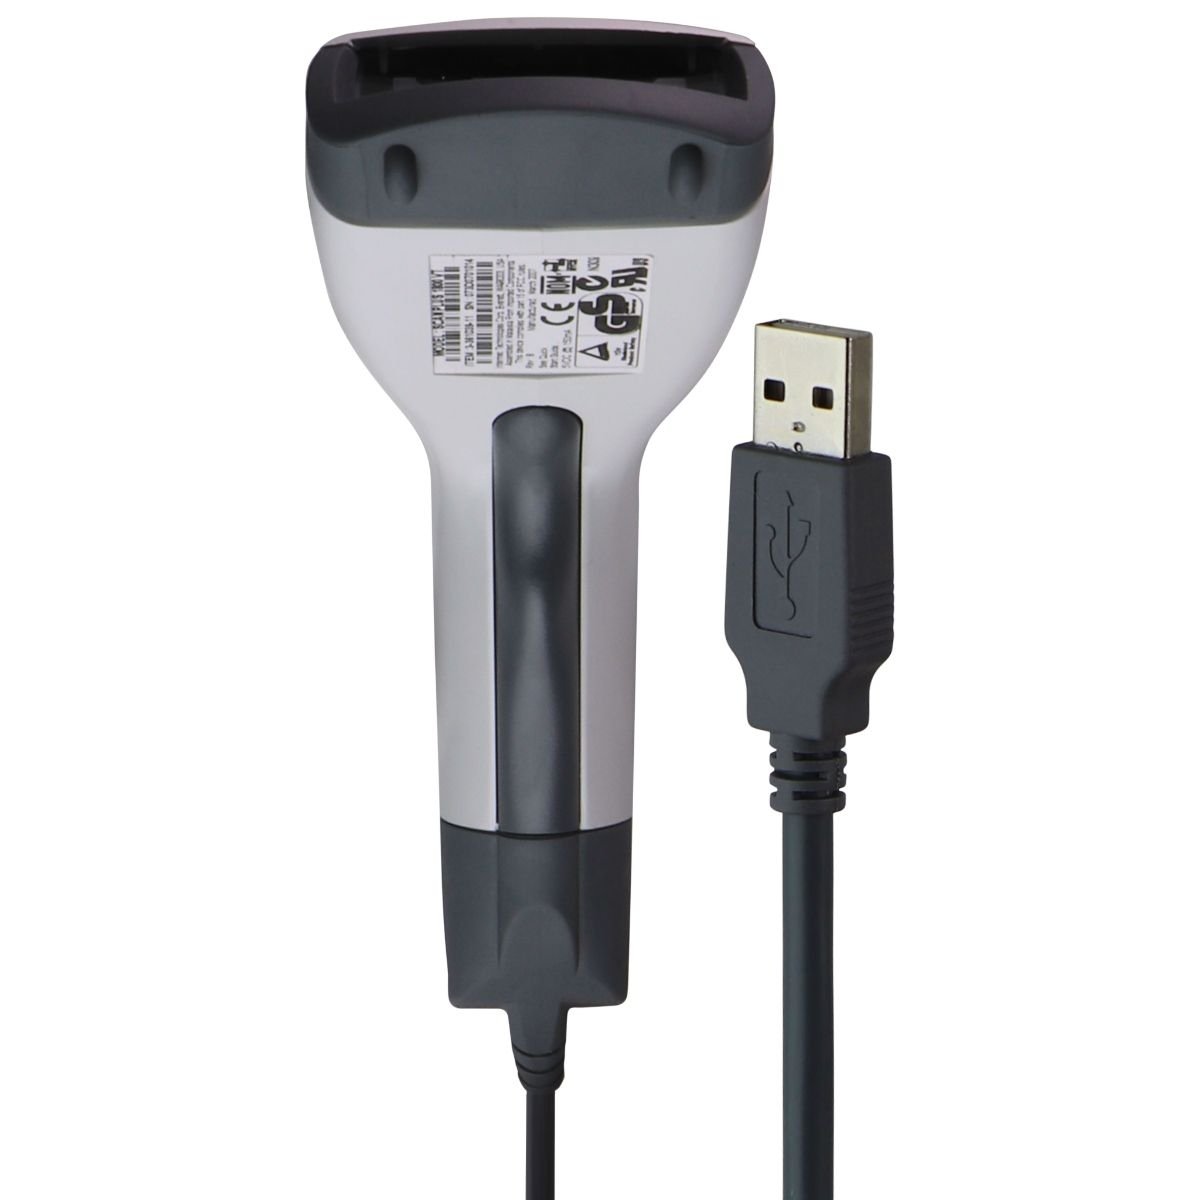 Intermec ScanPlus 1800 VT Barcode Scanner With USB Cable - White